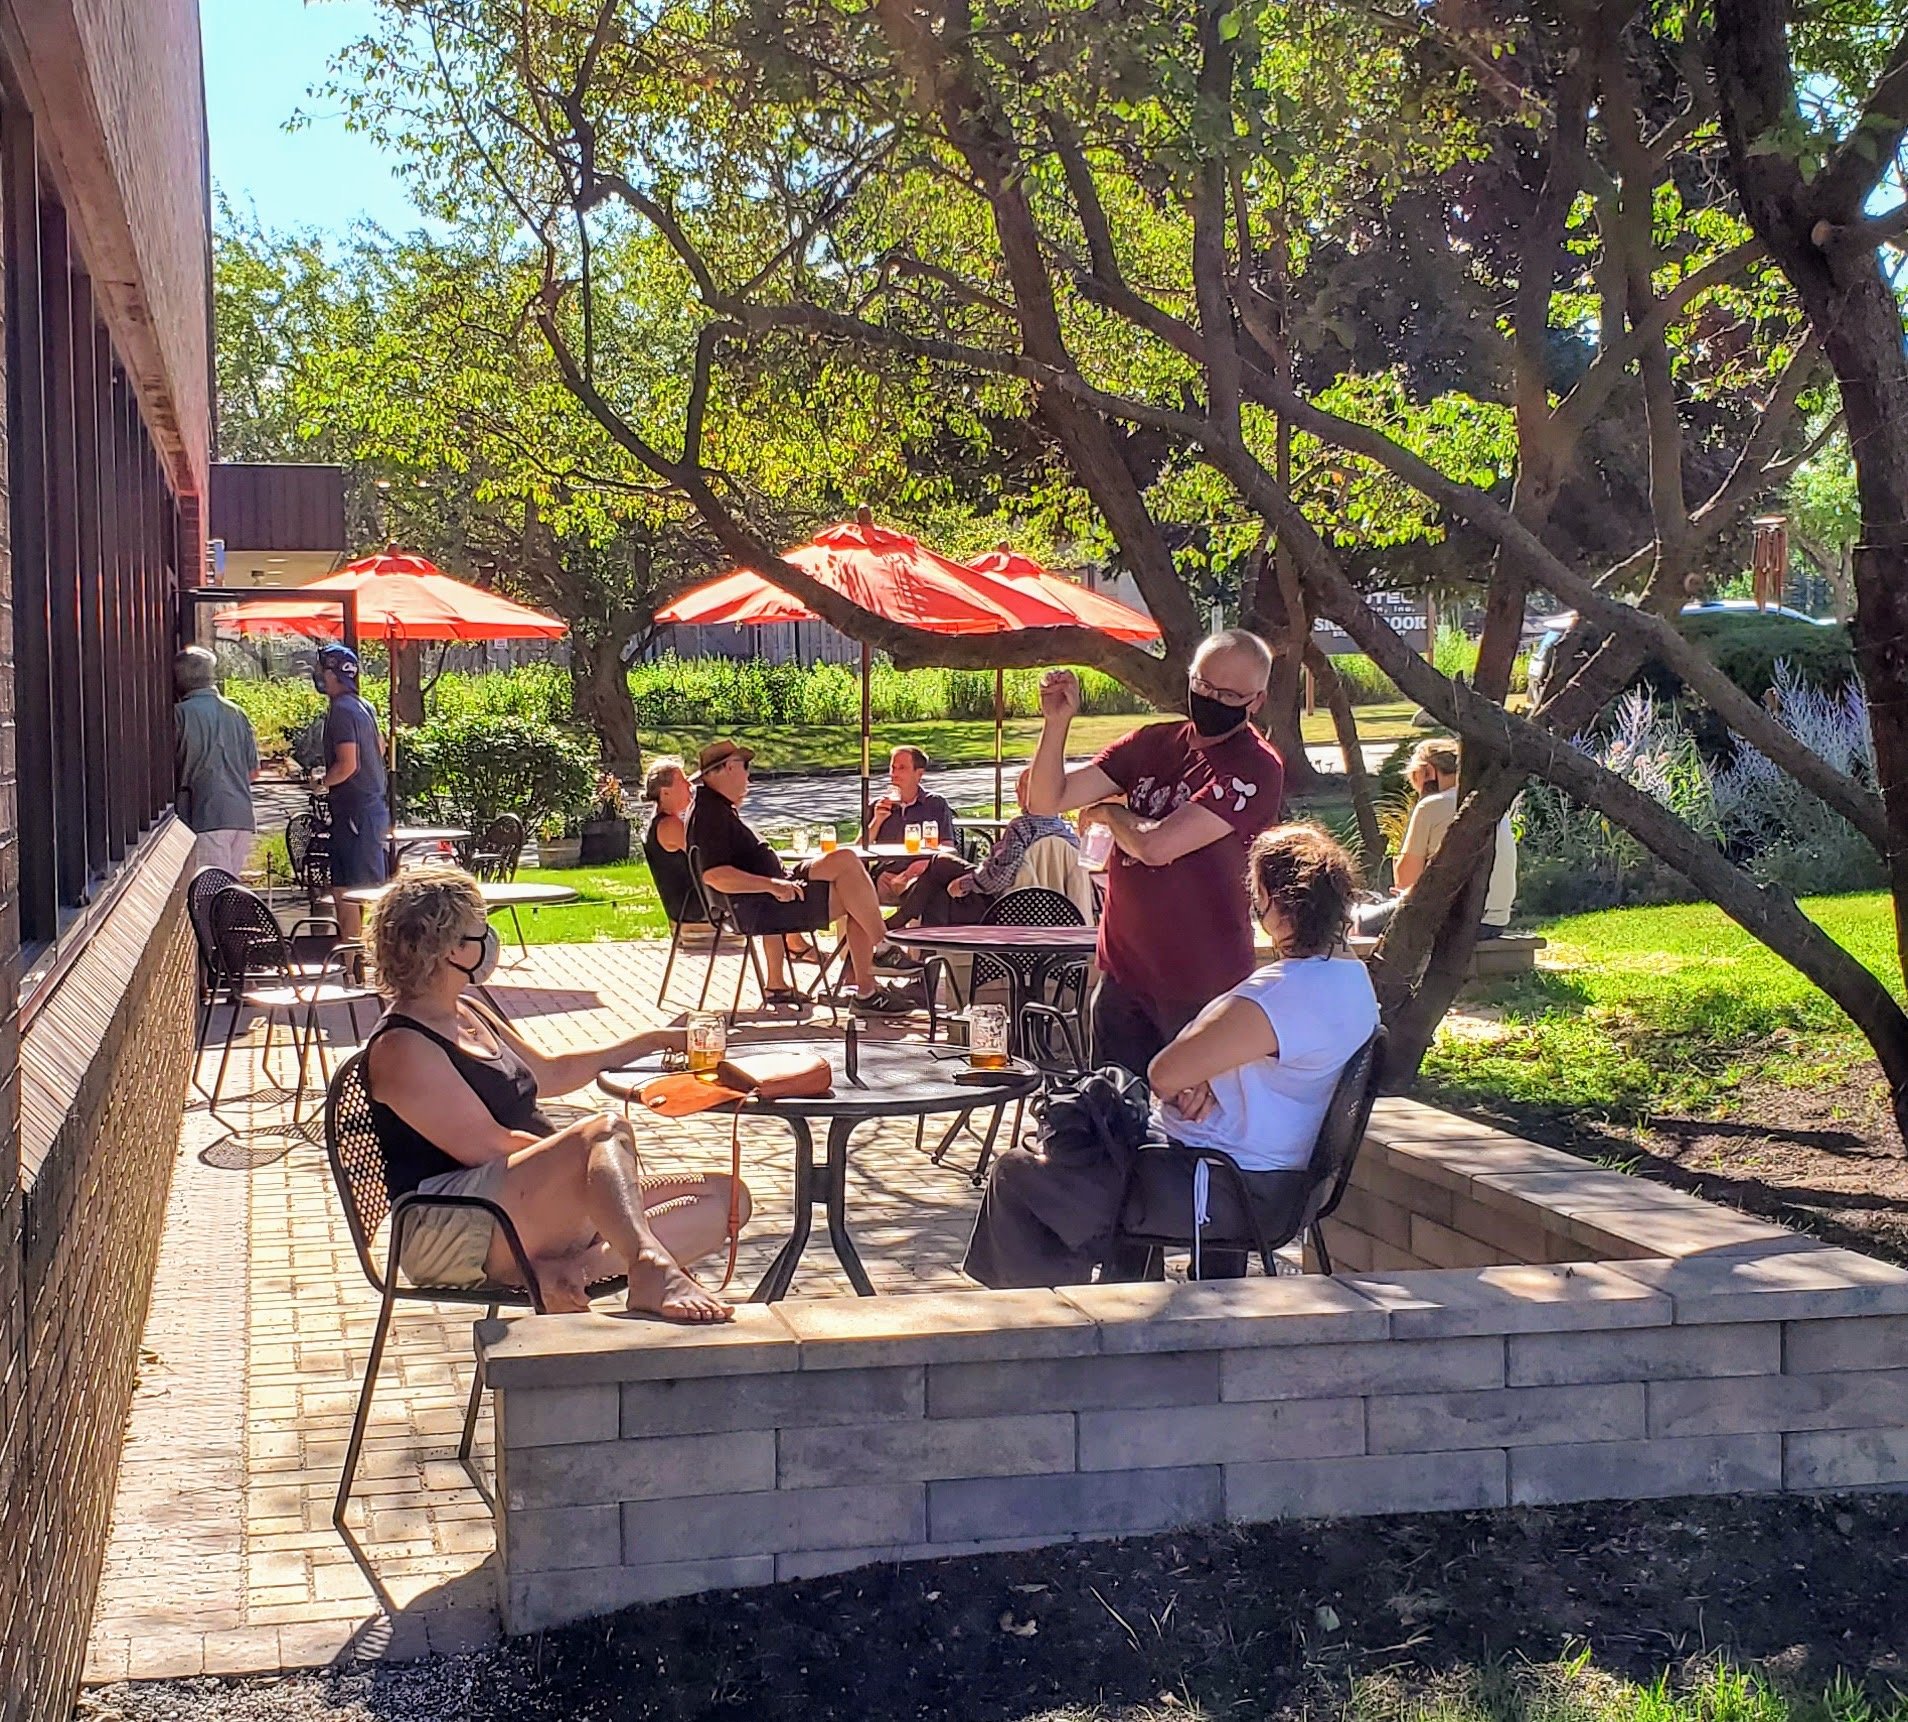  Large outdoor patio and beer garden at skokie brewery and taproom 